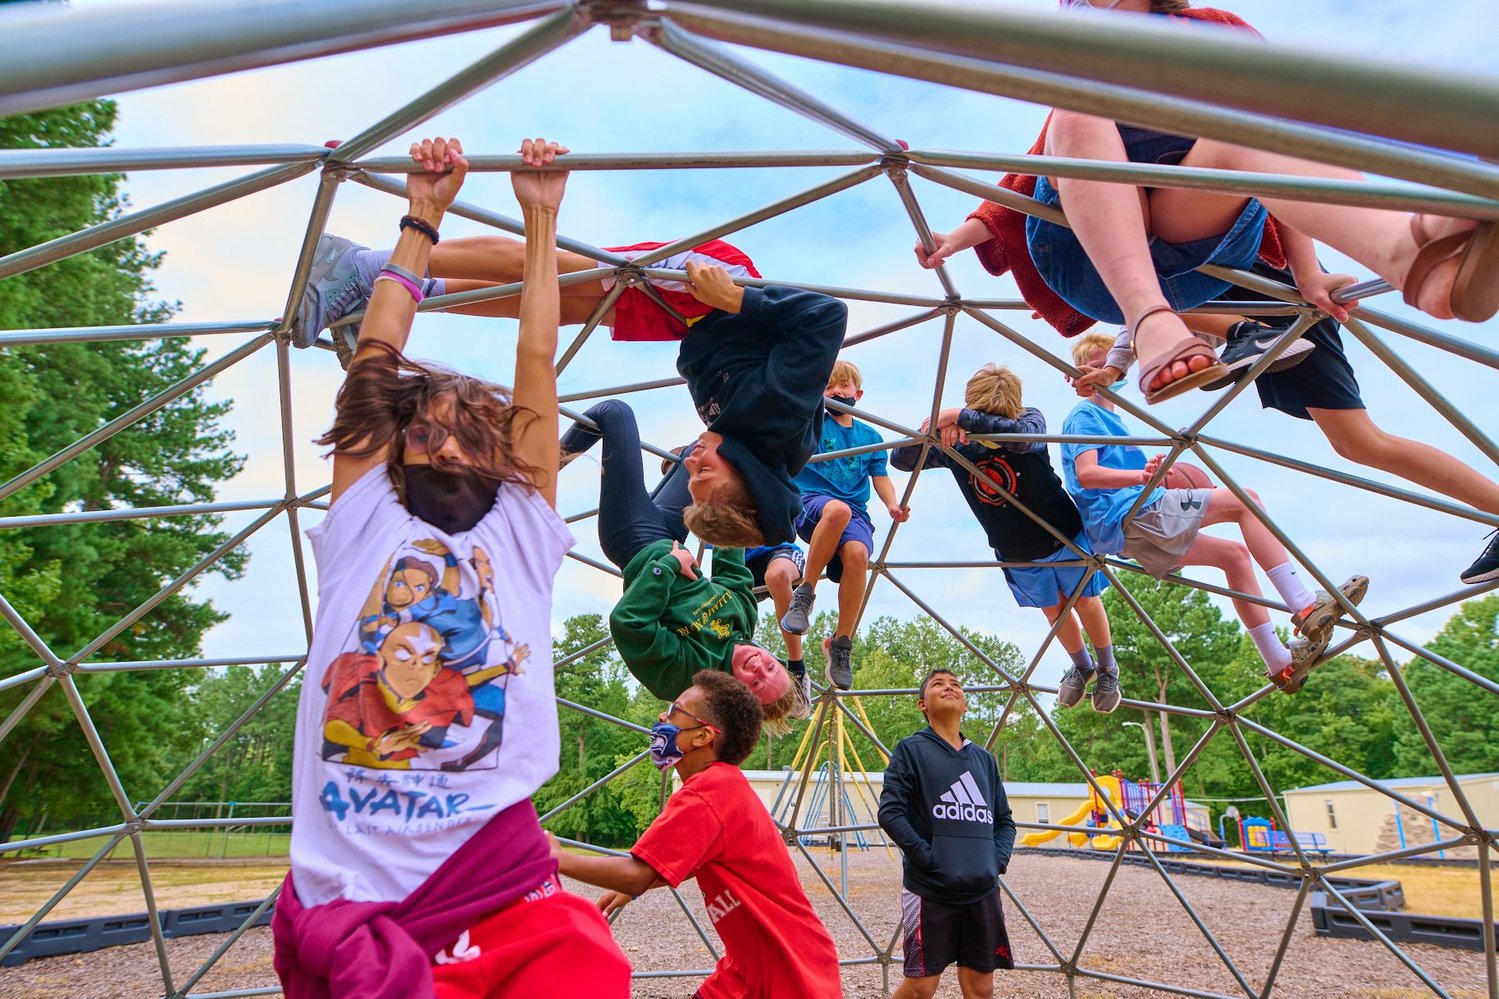 The dual language camp was designed to teach students
Spanish while also having fun. Here, middle school students
at North Chatham spend time on the playground.